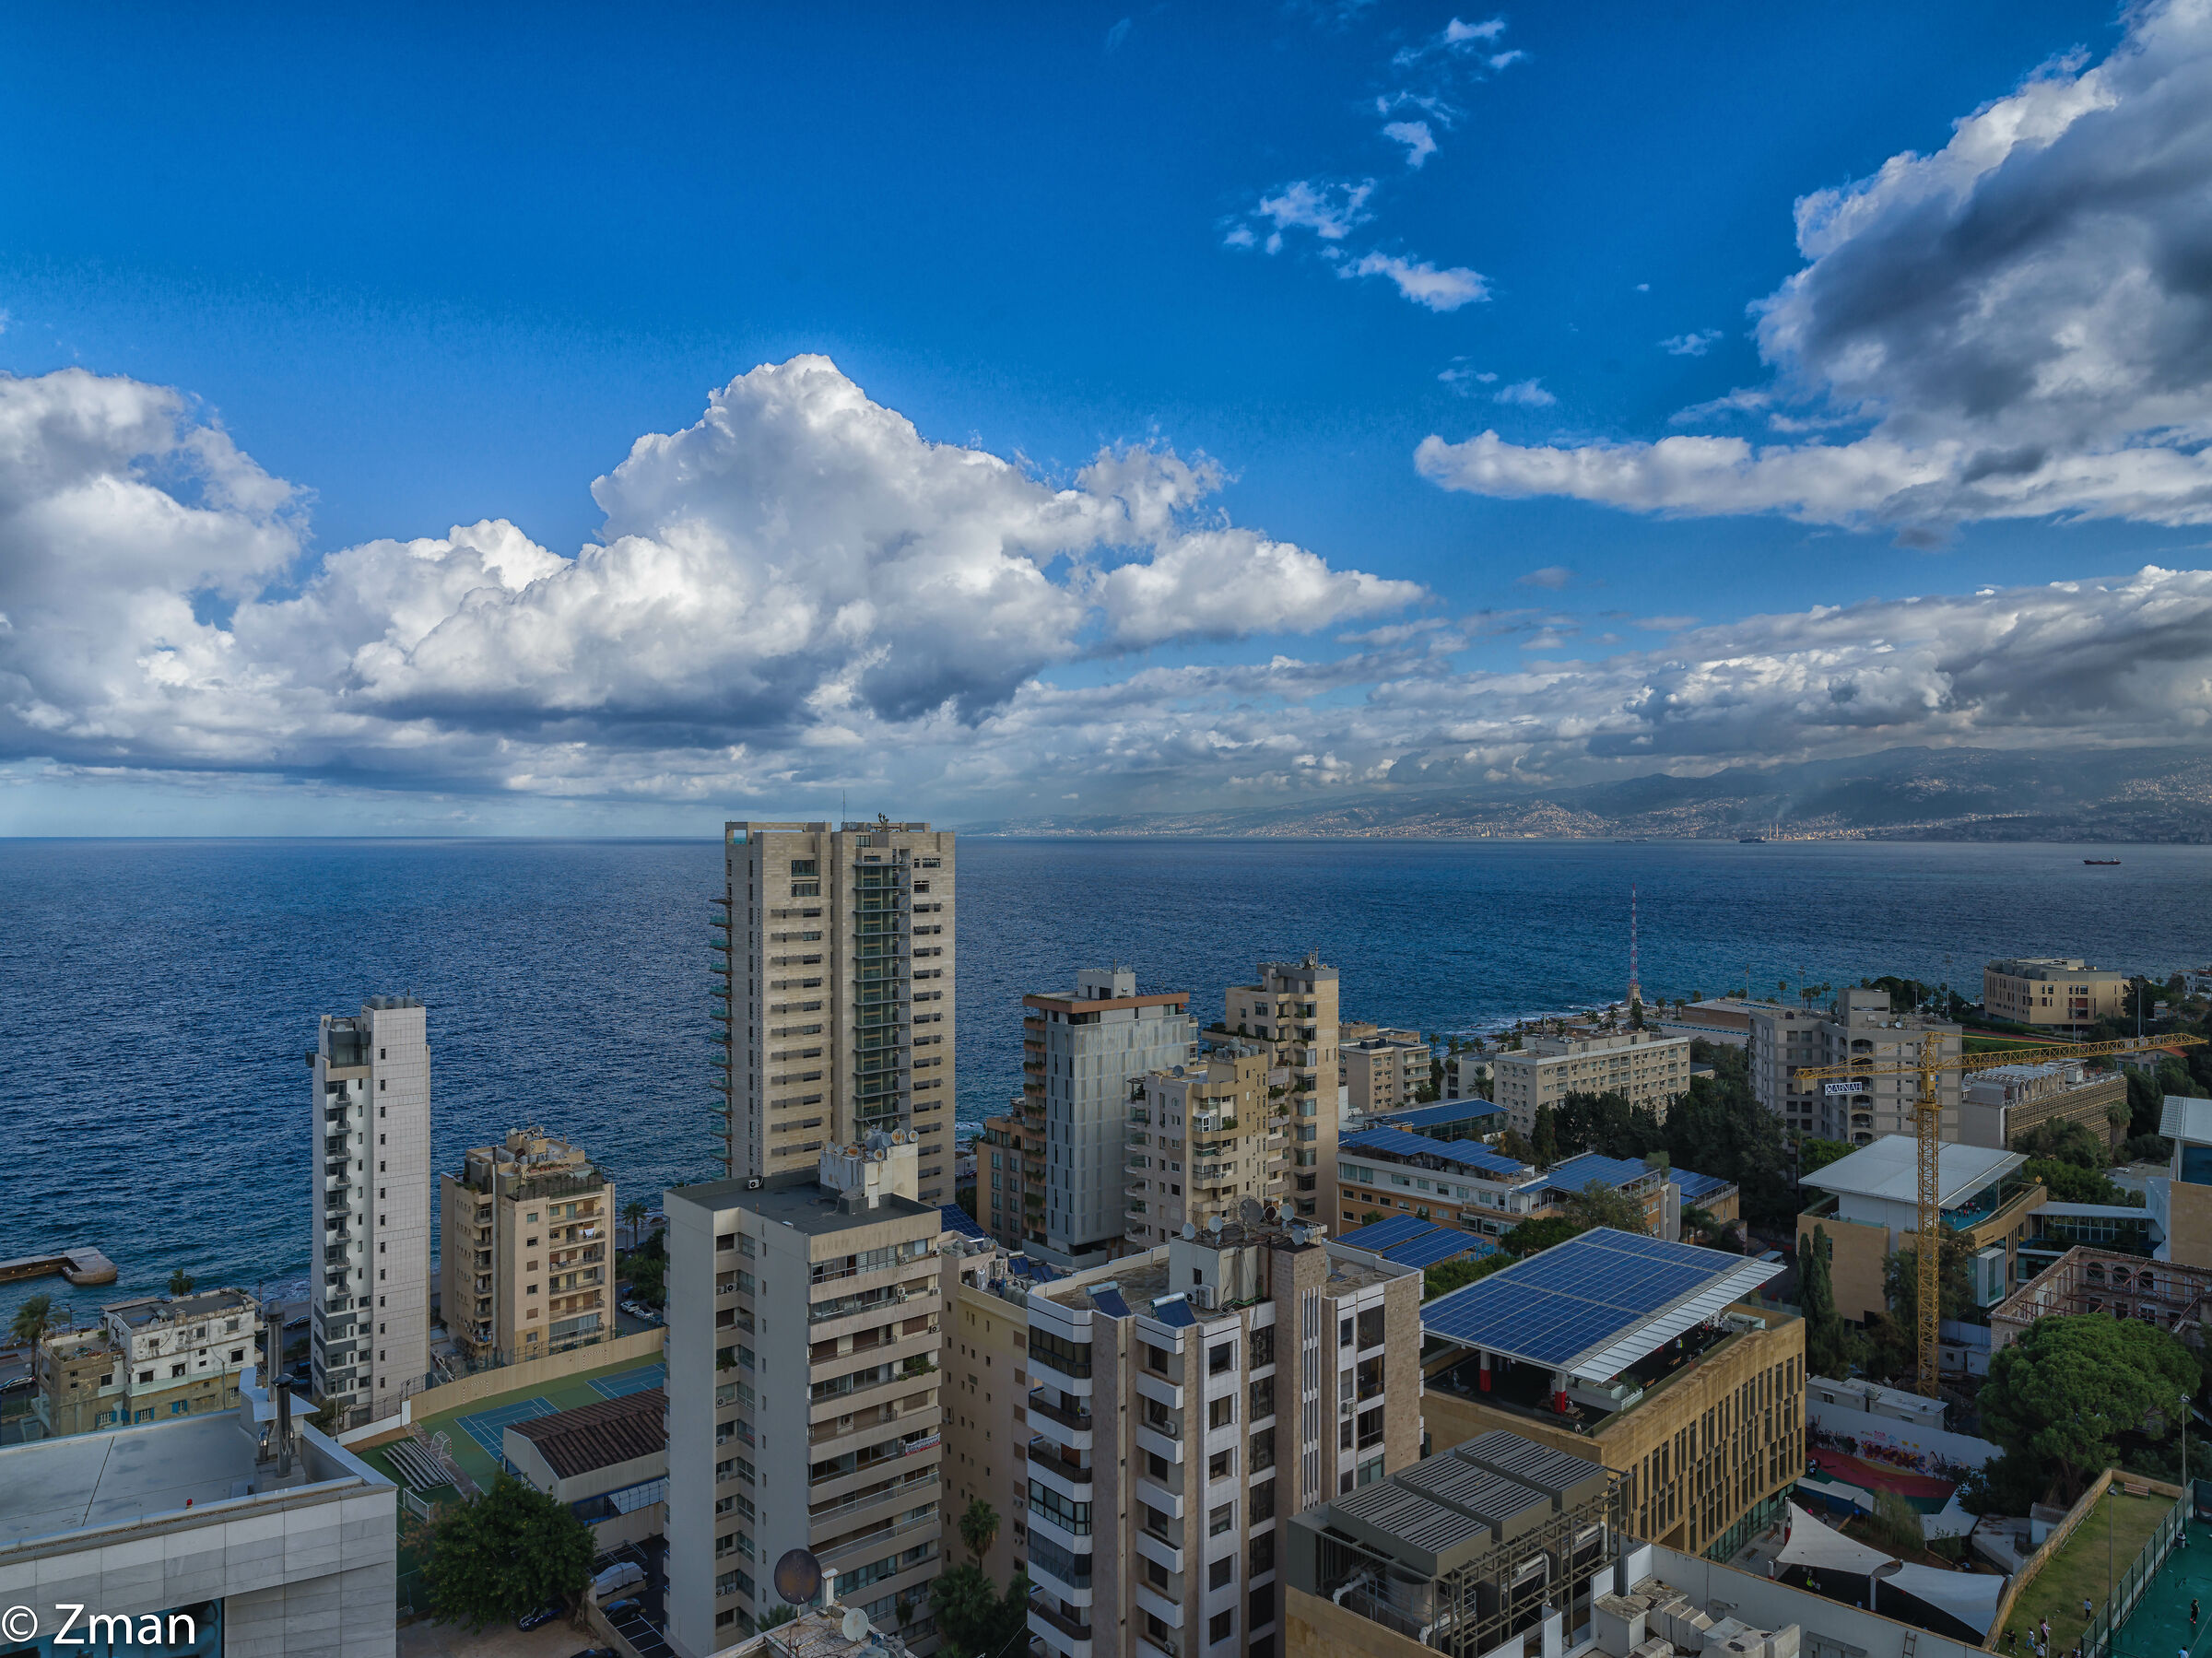 Beirut Our City...